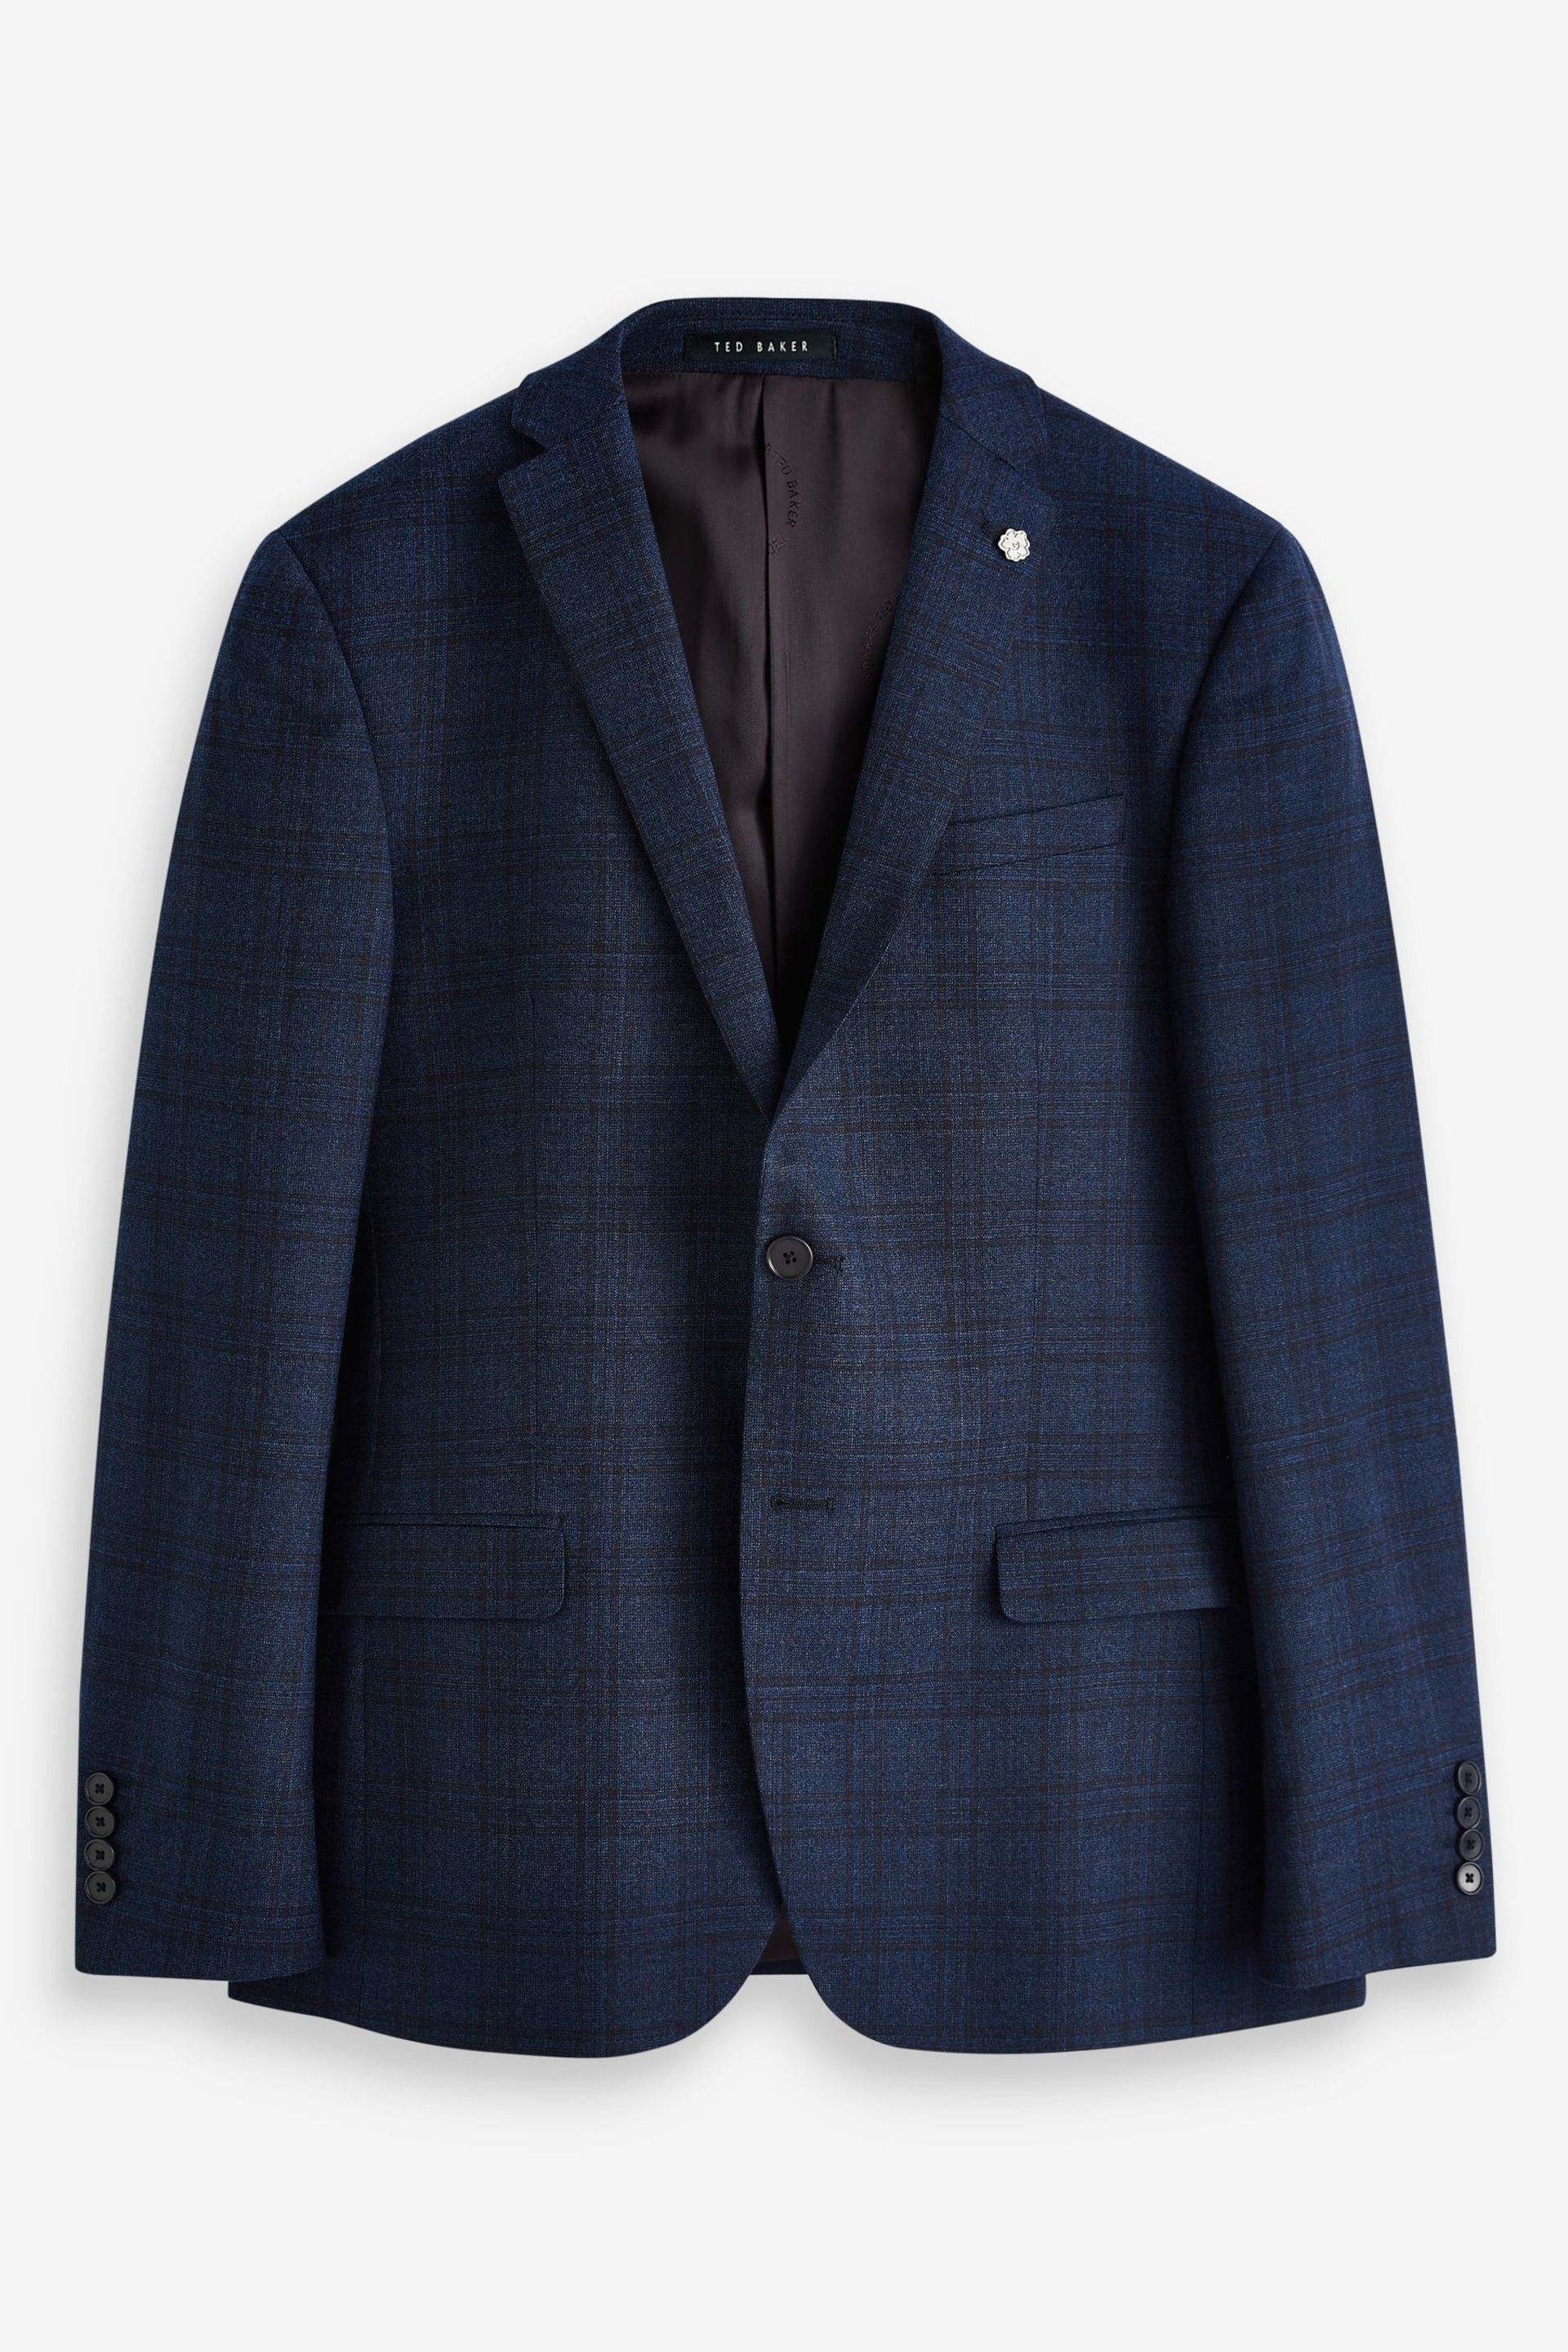 Ted Baker Tailoring Slim Fit Blue Munro Wine Check Jacket - Image 6 of 6